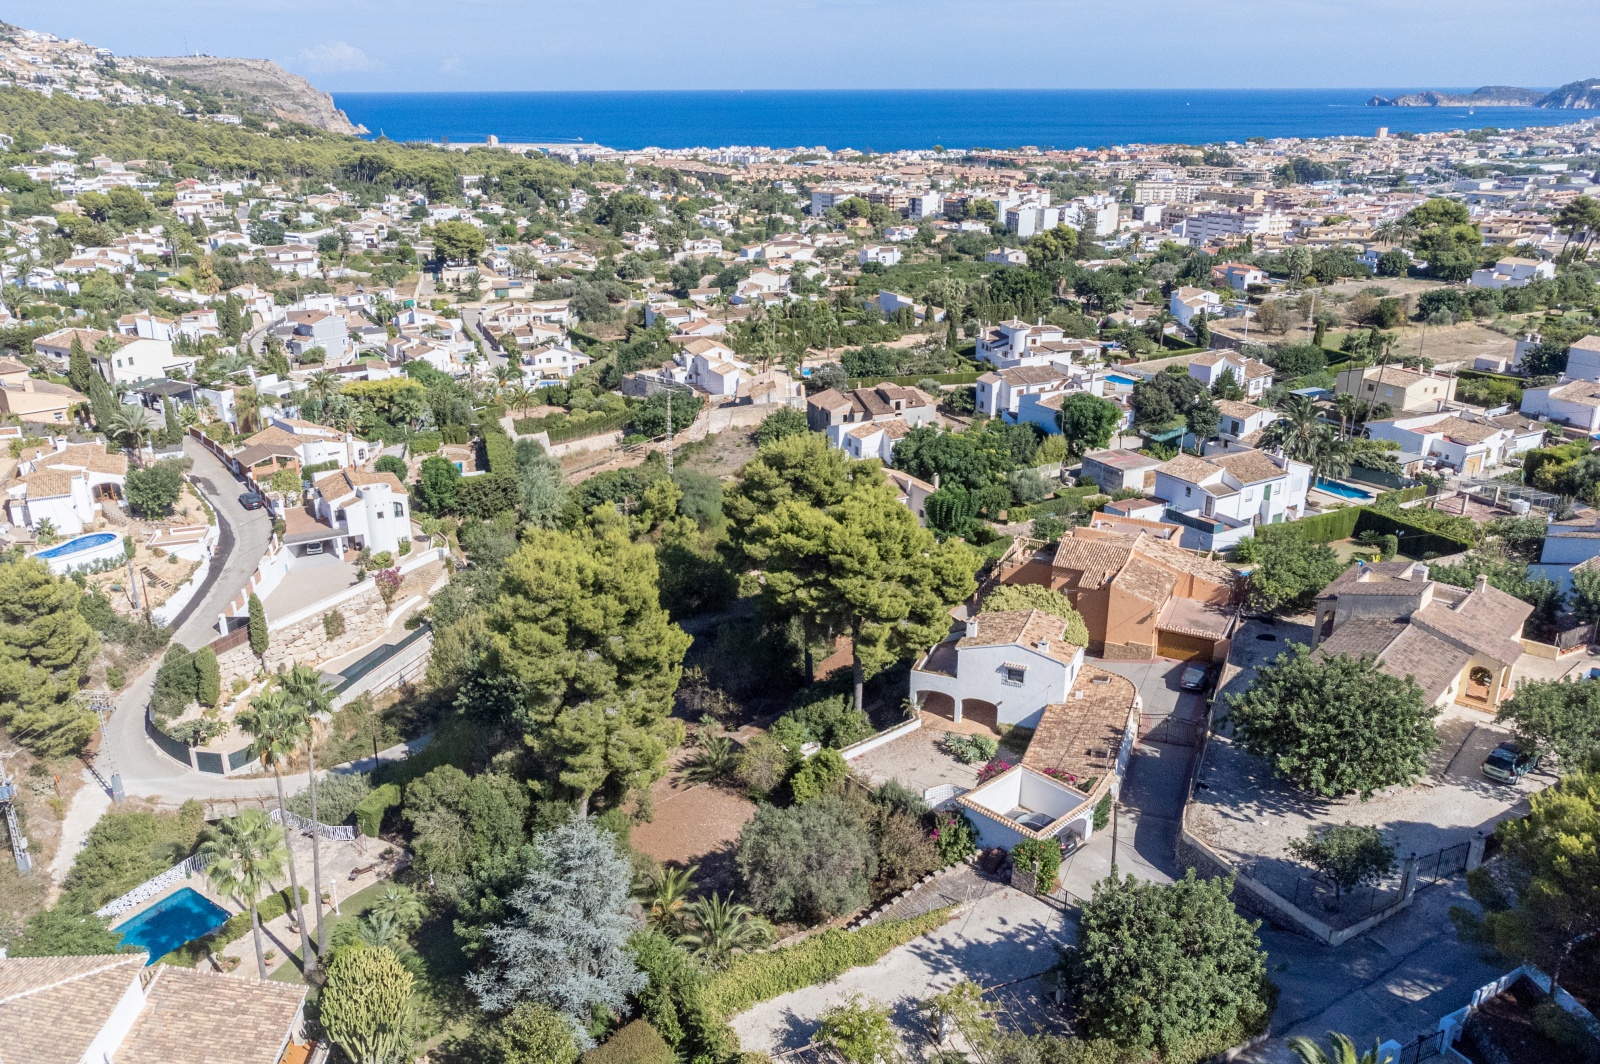 Sea view villa with 2734 m2 of land and lots of potential